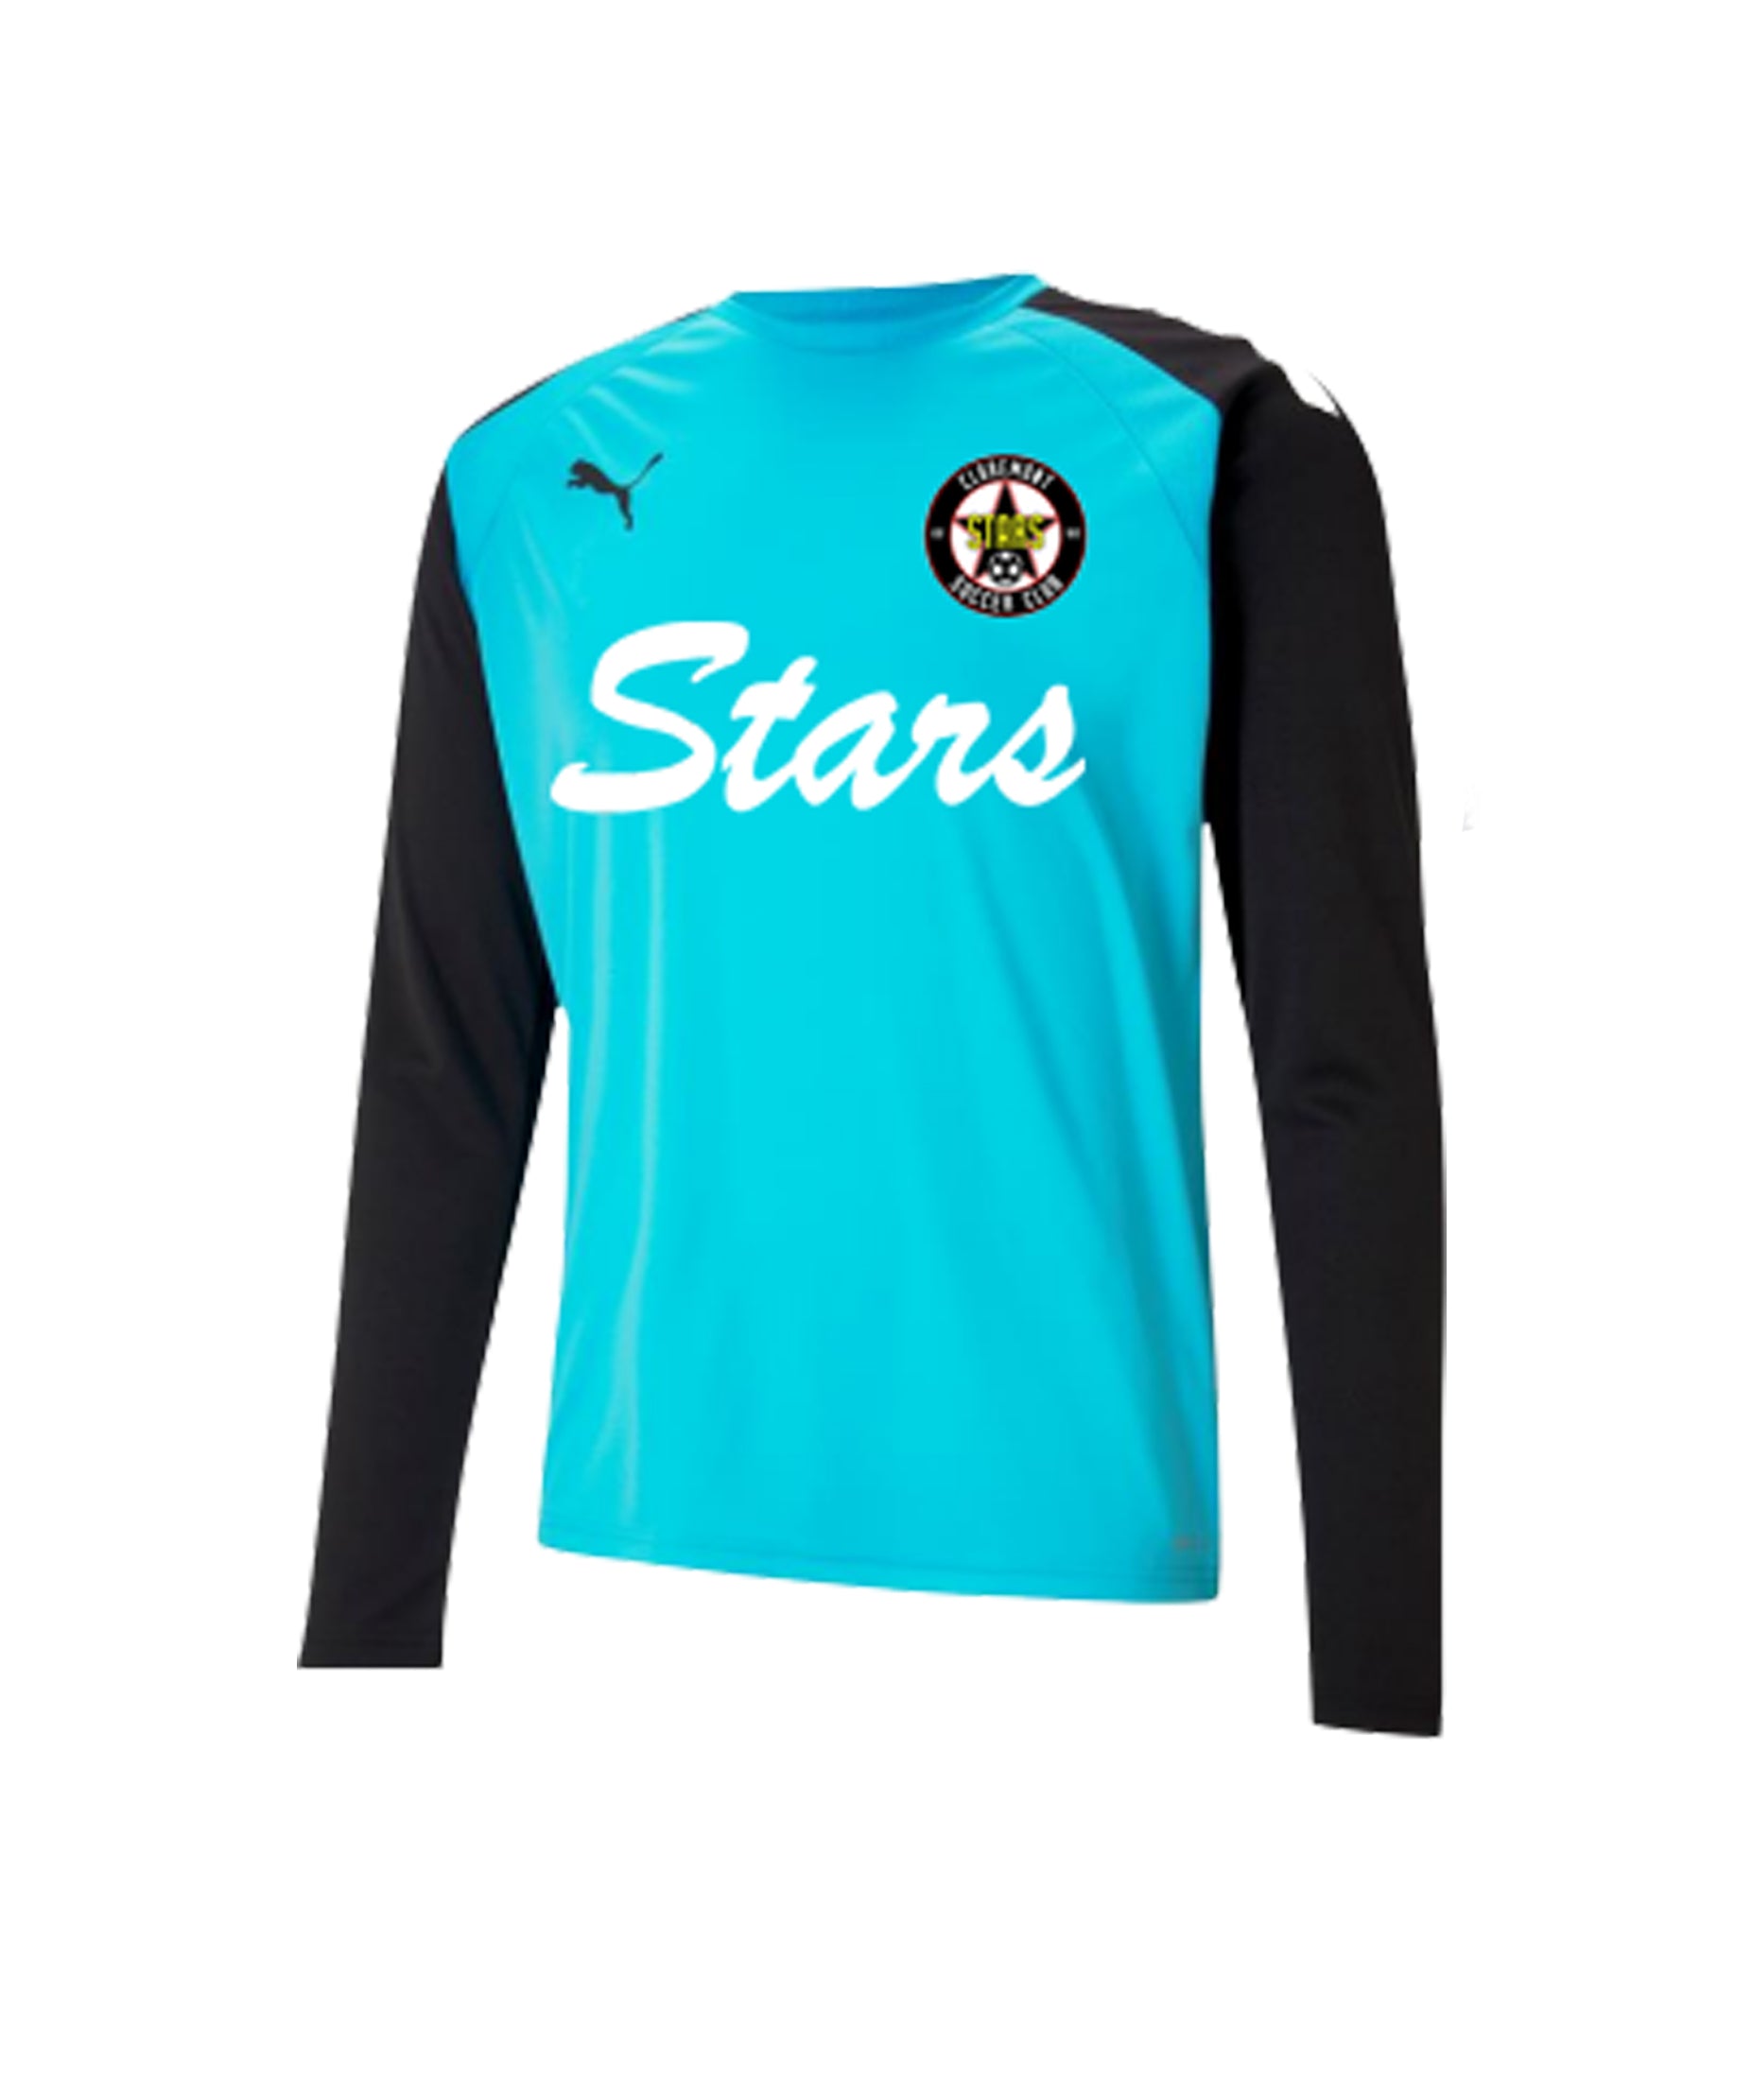 CLAREMONT STARS YOUTH AND ADULT GK JERSEY - PUMA PACER